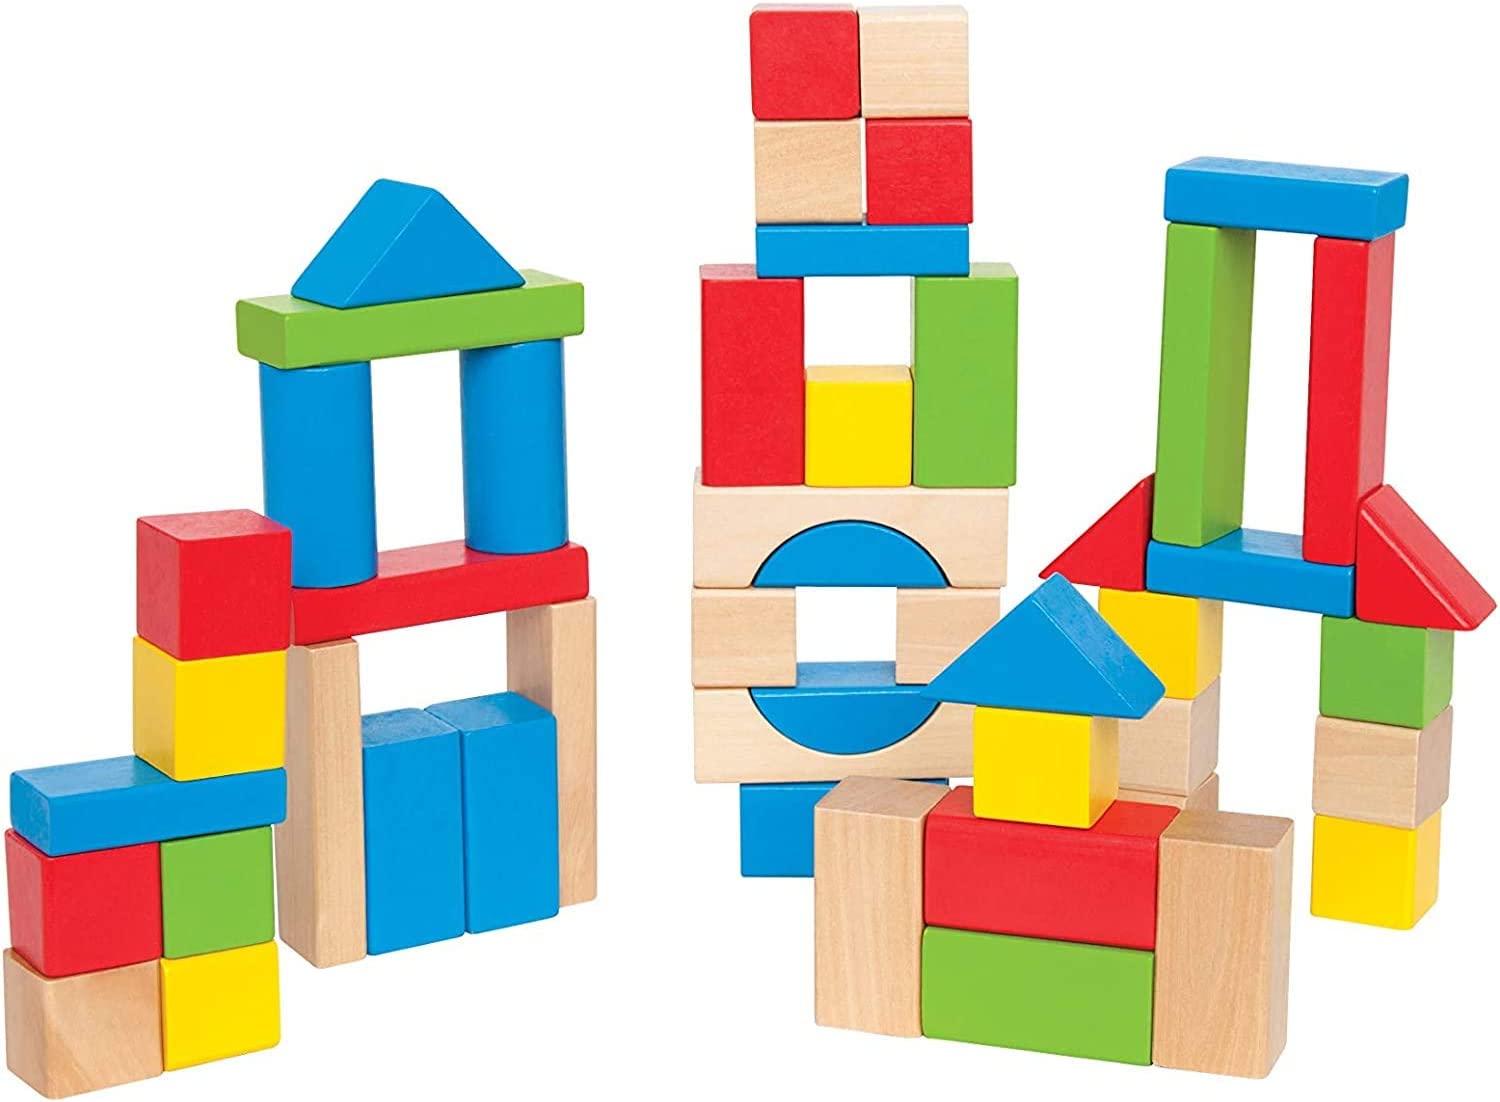 Image of multicolored and sized children's building blocks. 